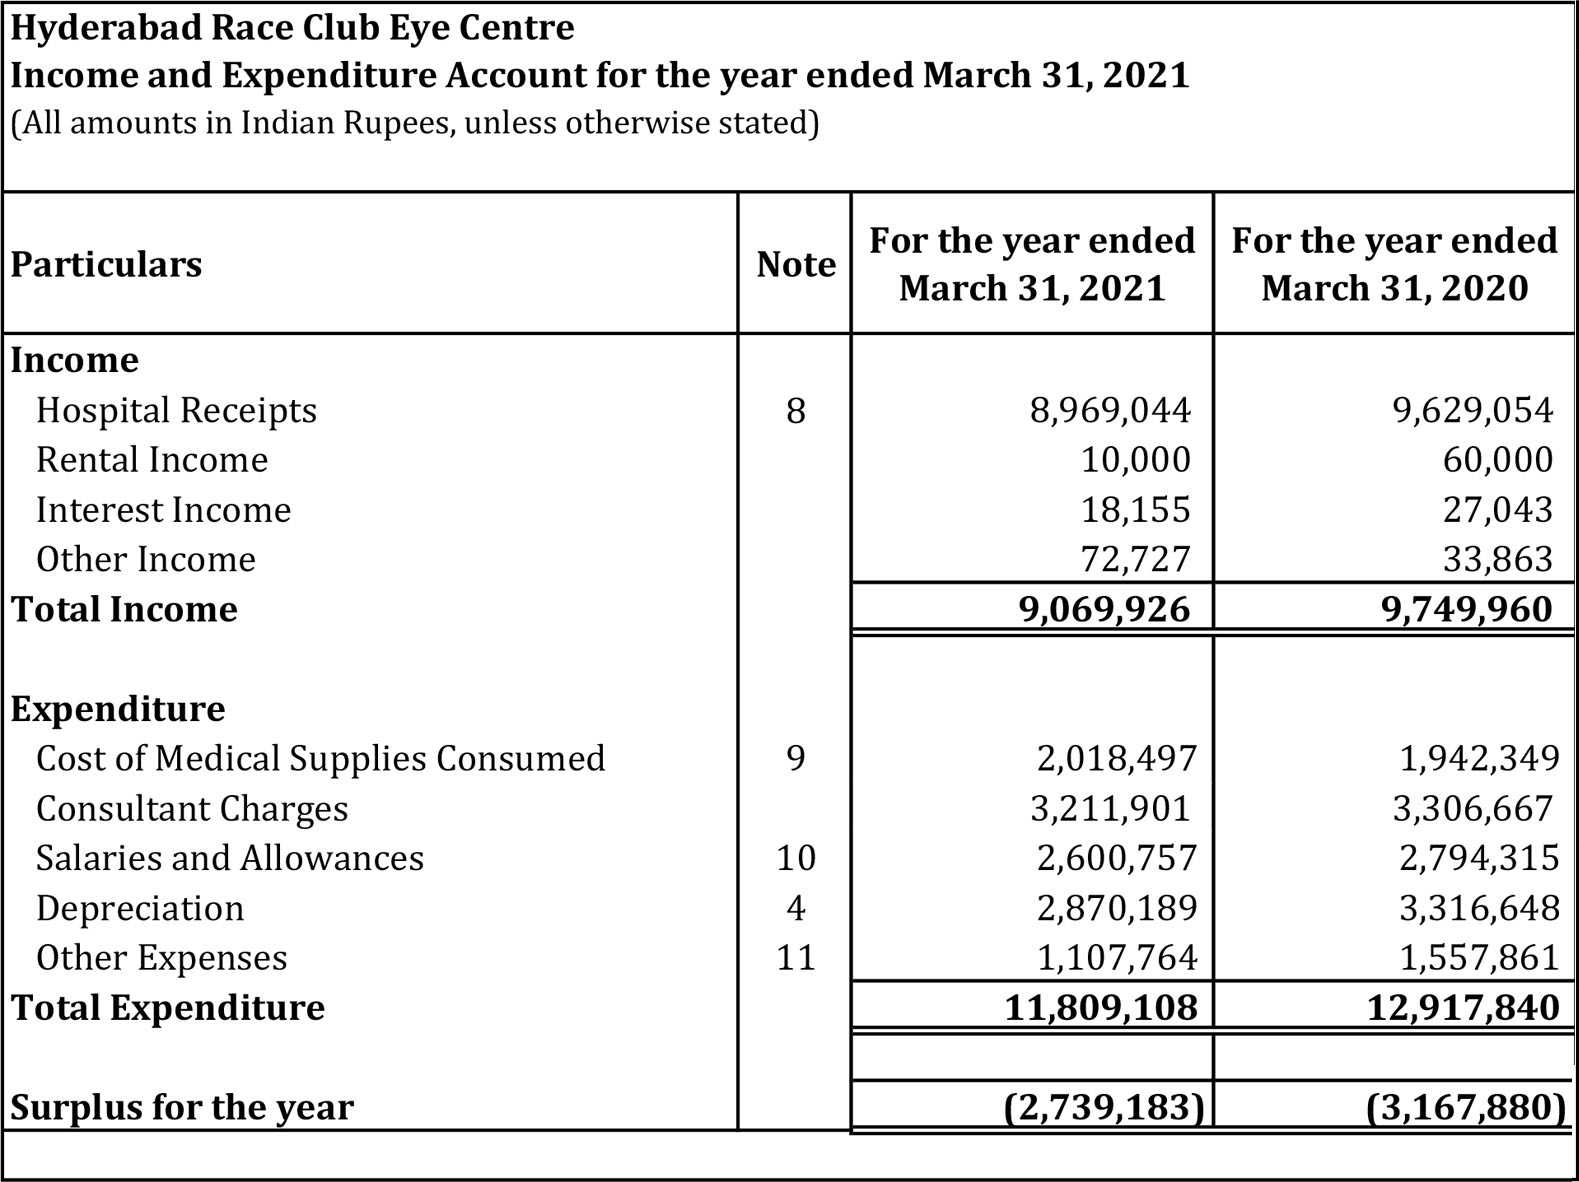 HRC_IncomeExpenditure_March31_2021